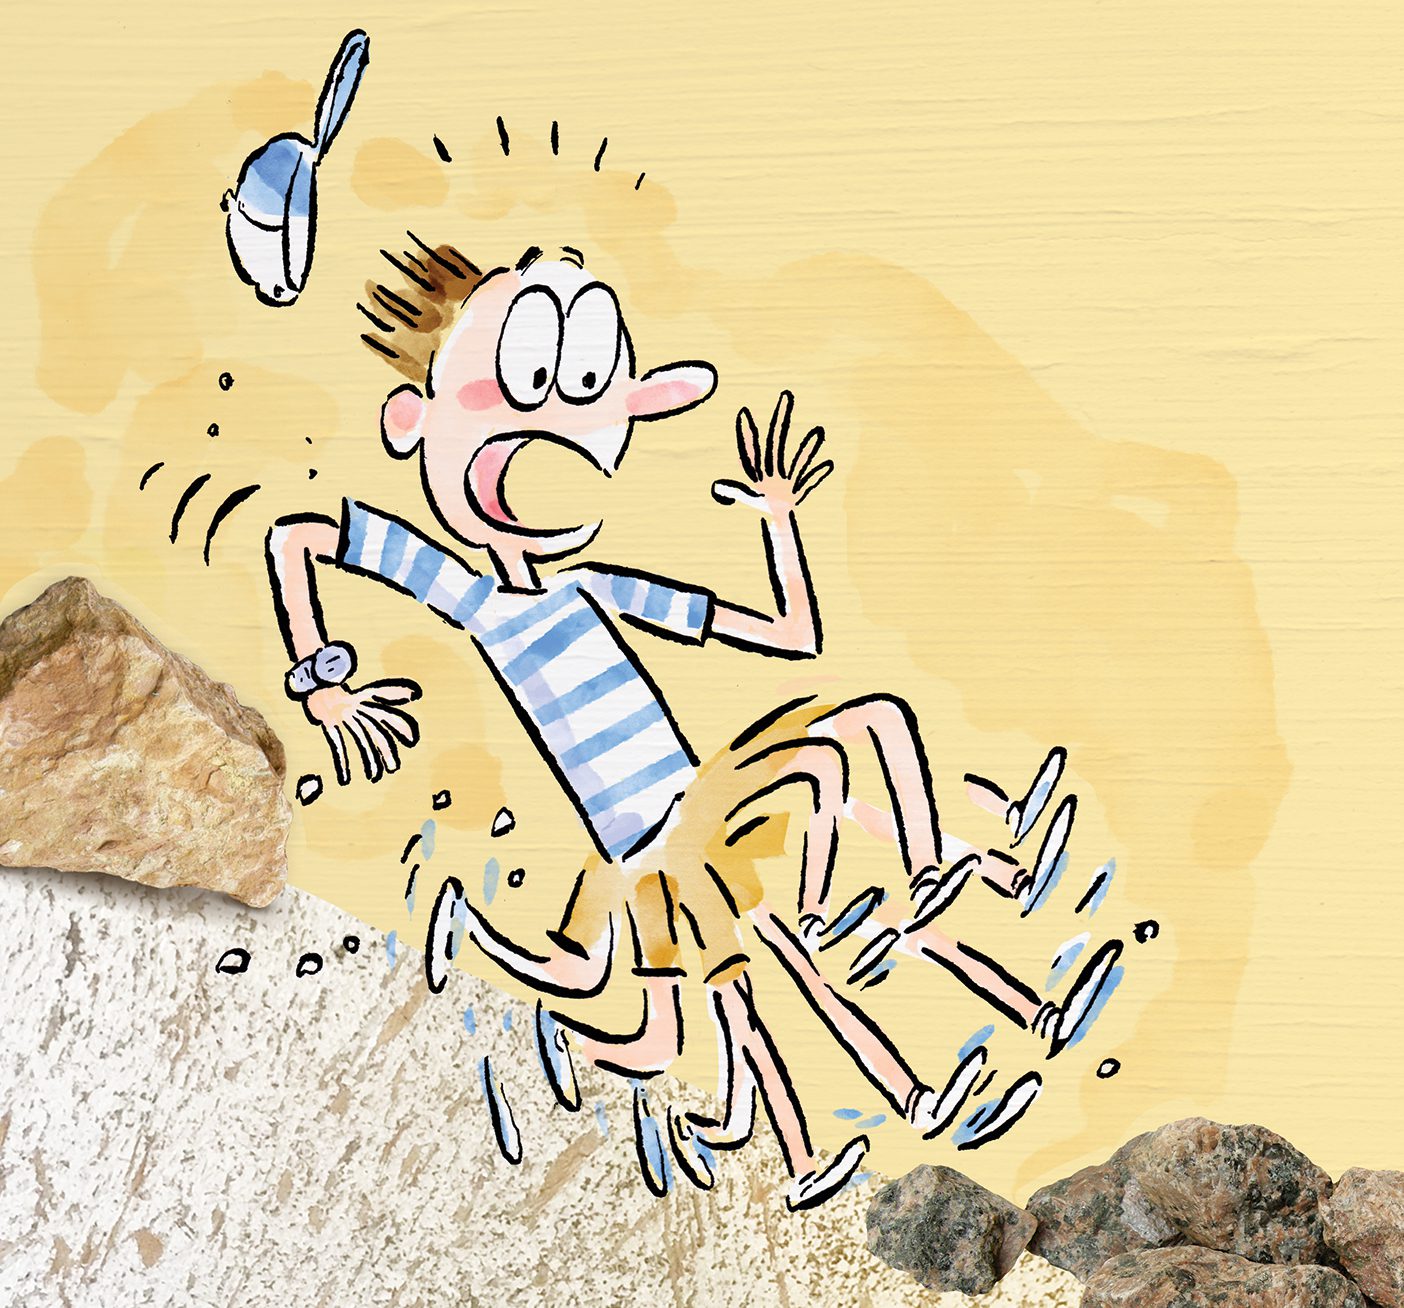 An illustration of a boy running down a mountain. He looks panicked, and his baseball hat is falling off.